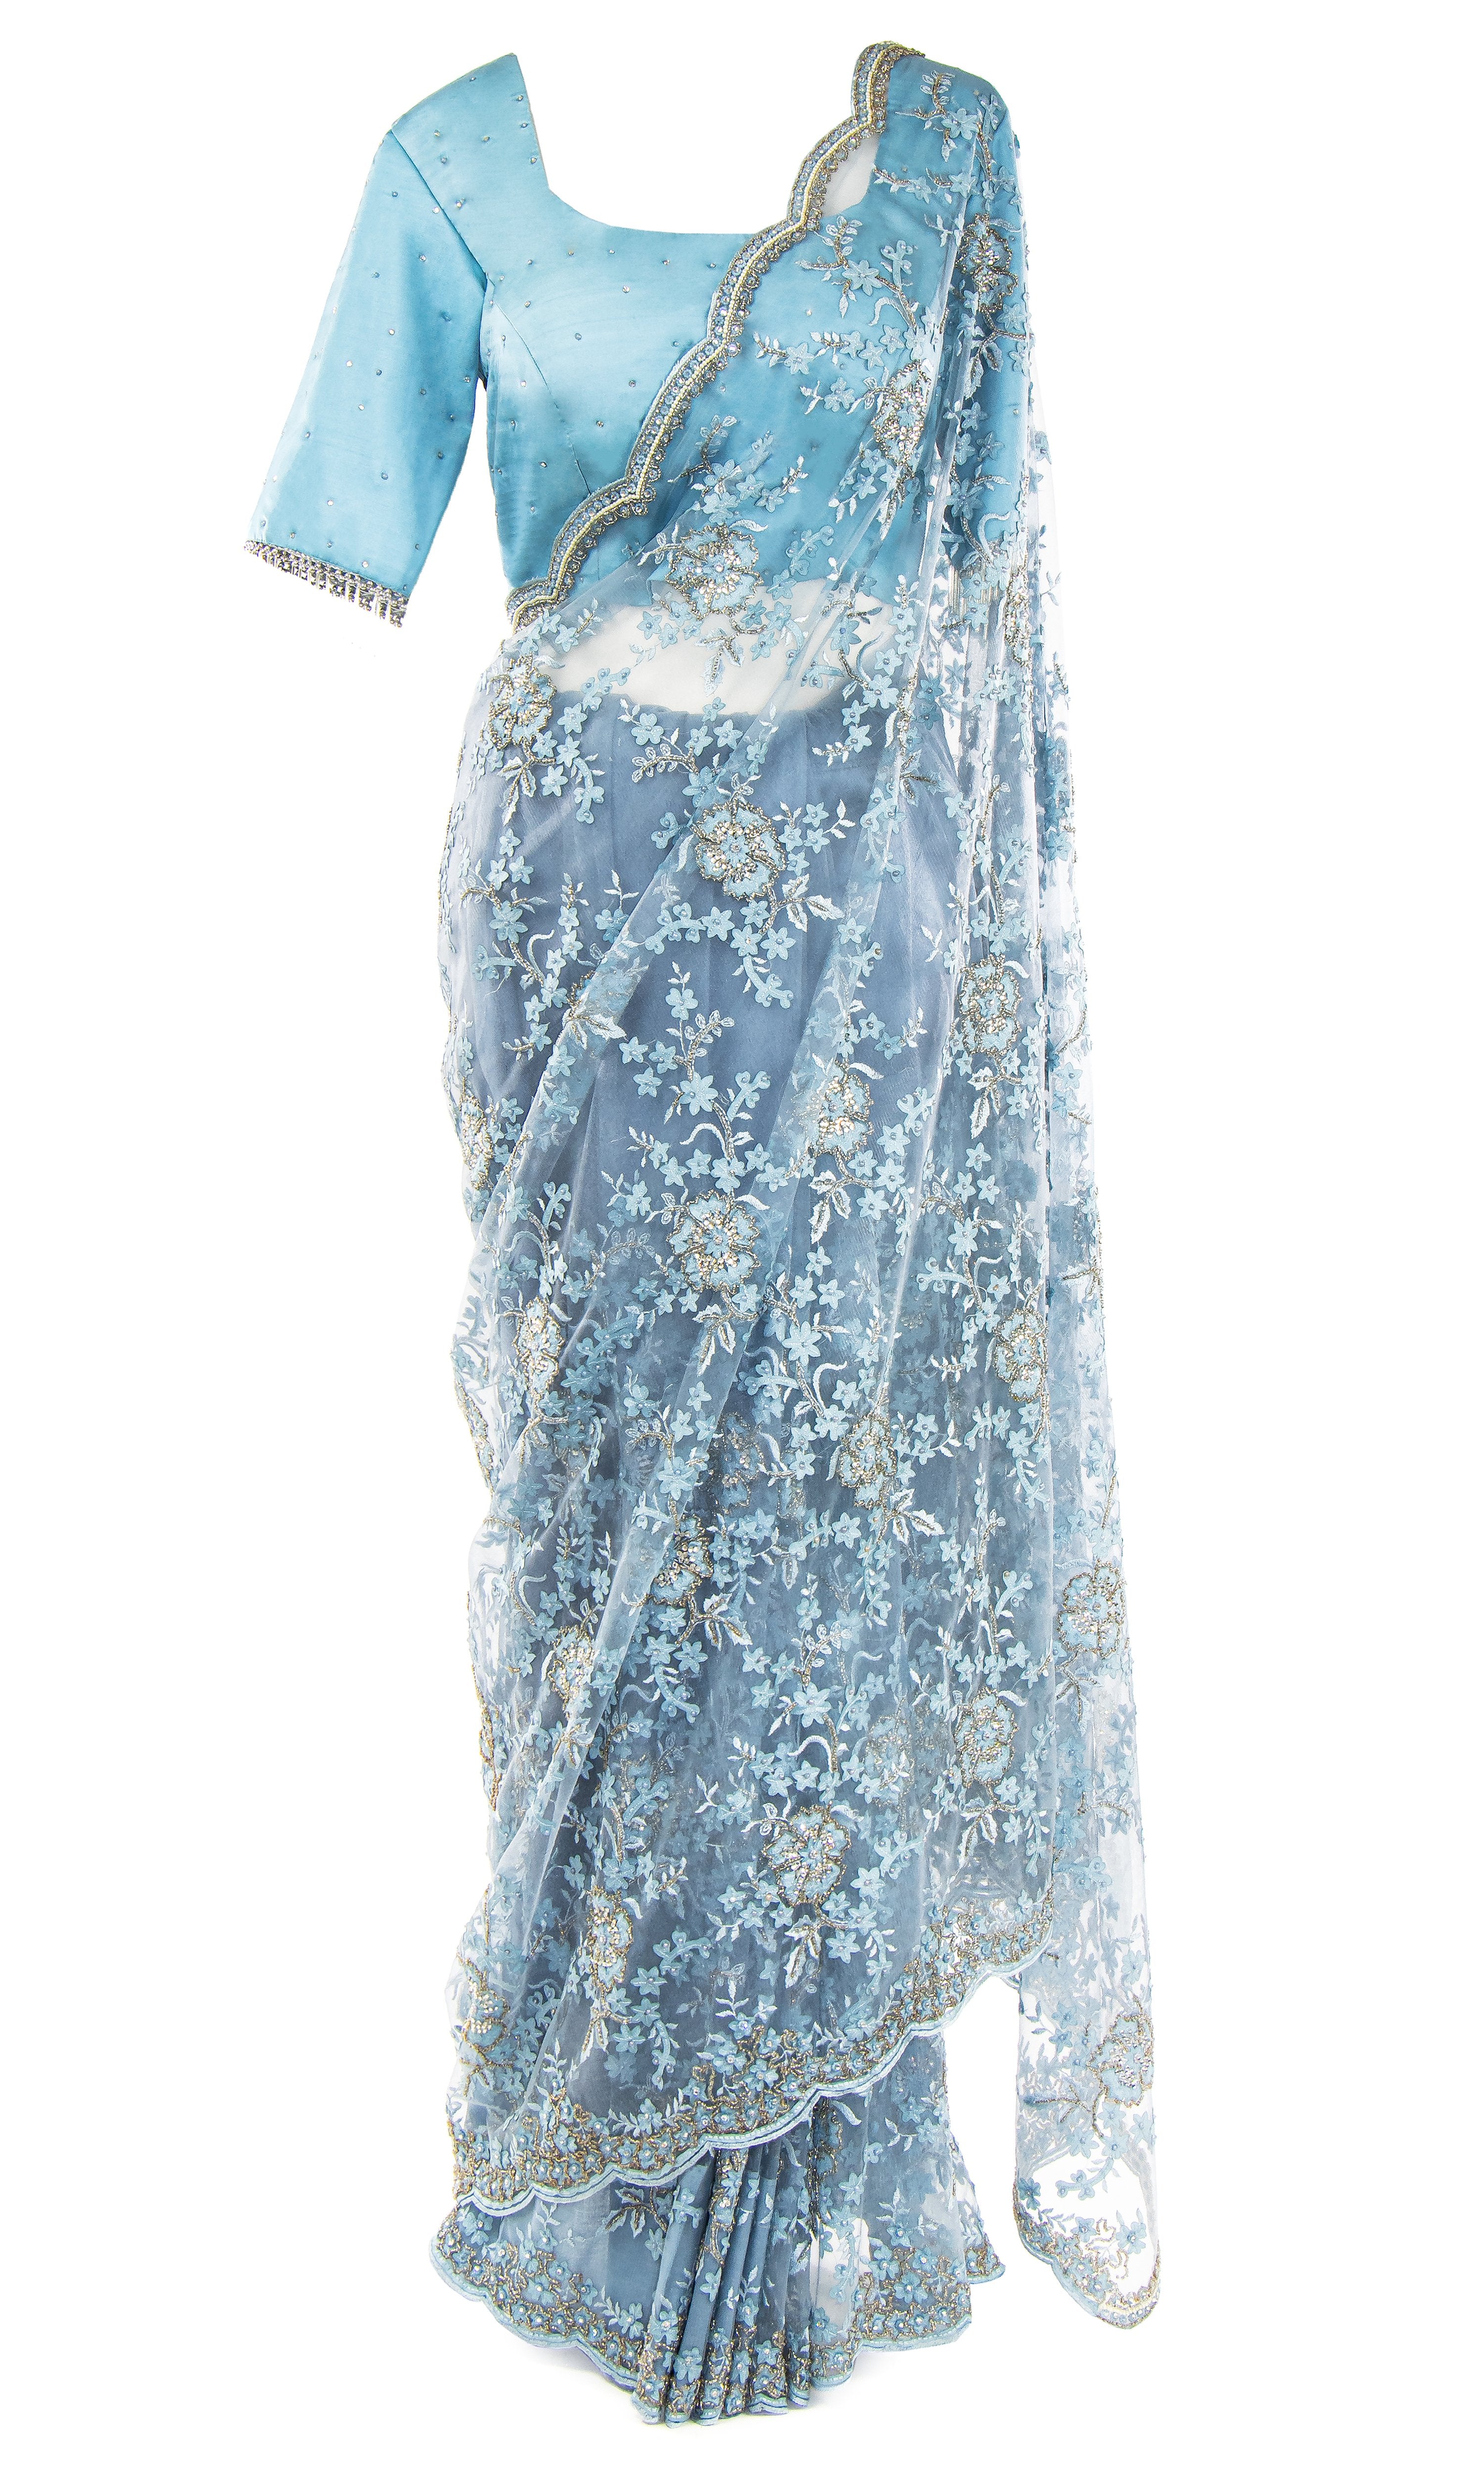 Lacy net Saree embellished with beaded blue and silver florals paired with pale blue silk top.